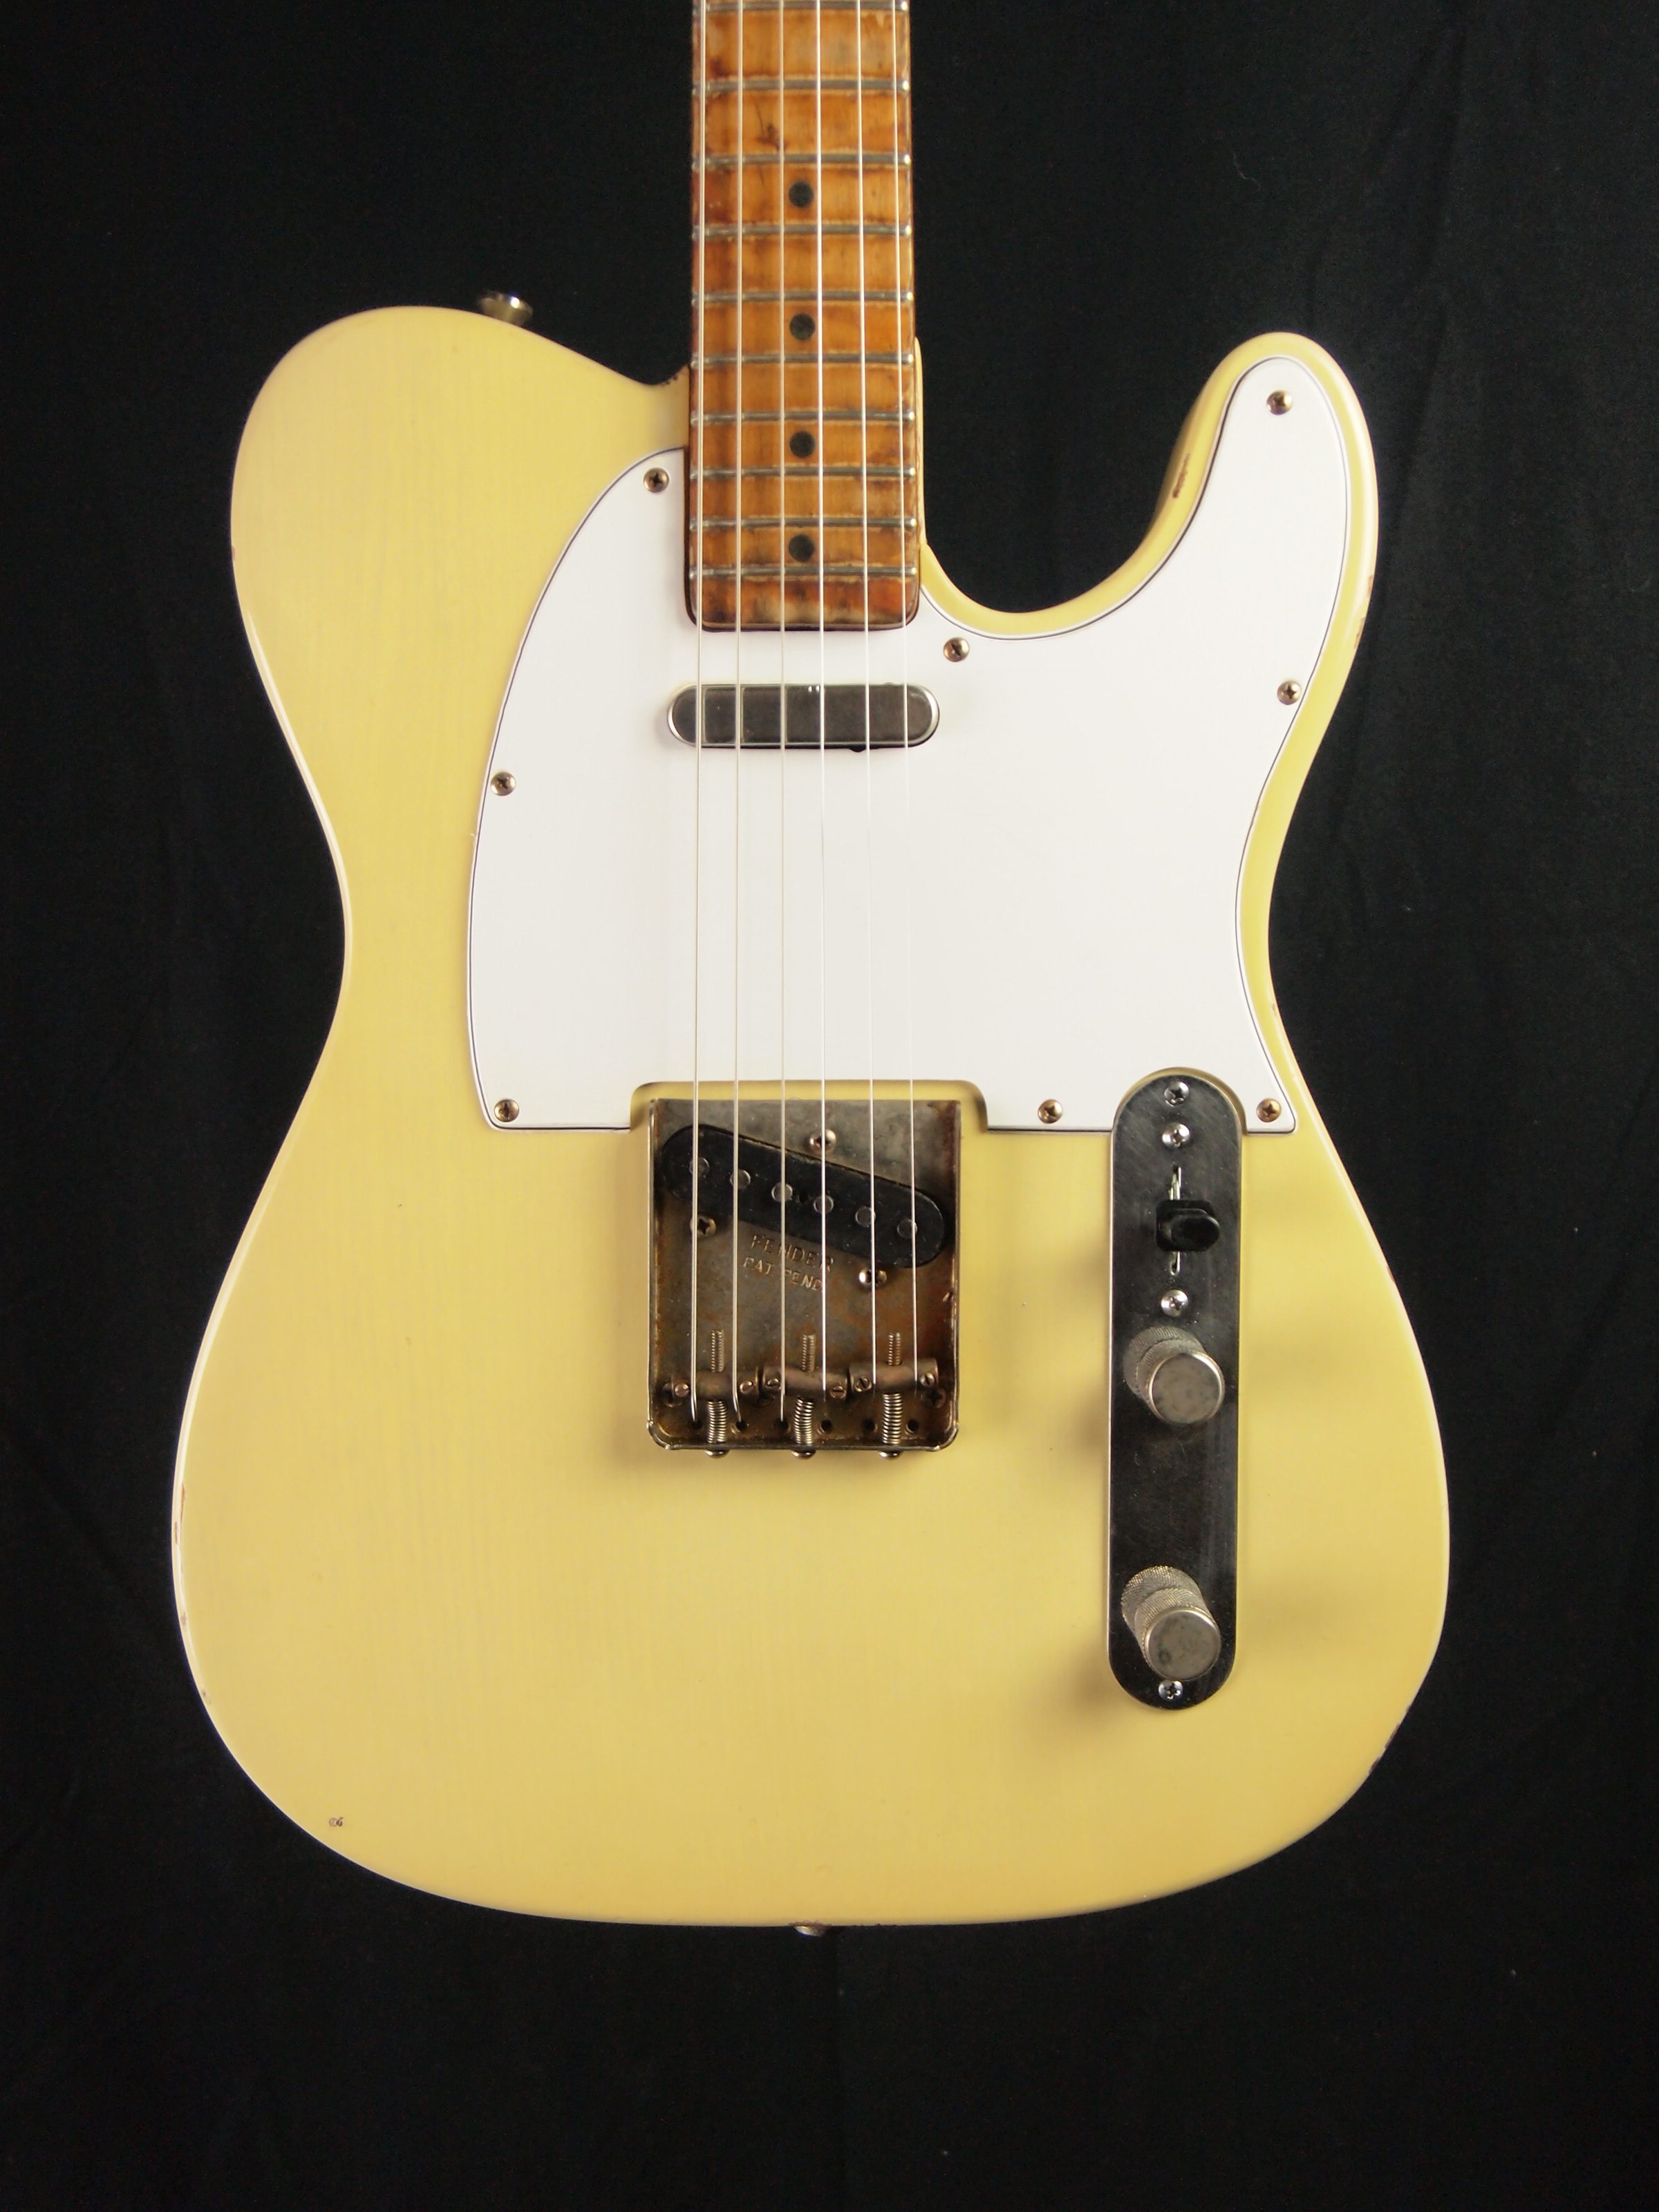 Lay's Guitar Shop yellow Telecaster refinish and relic